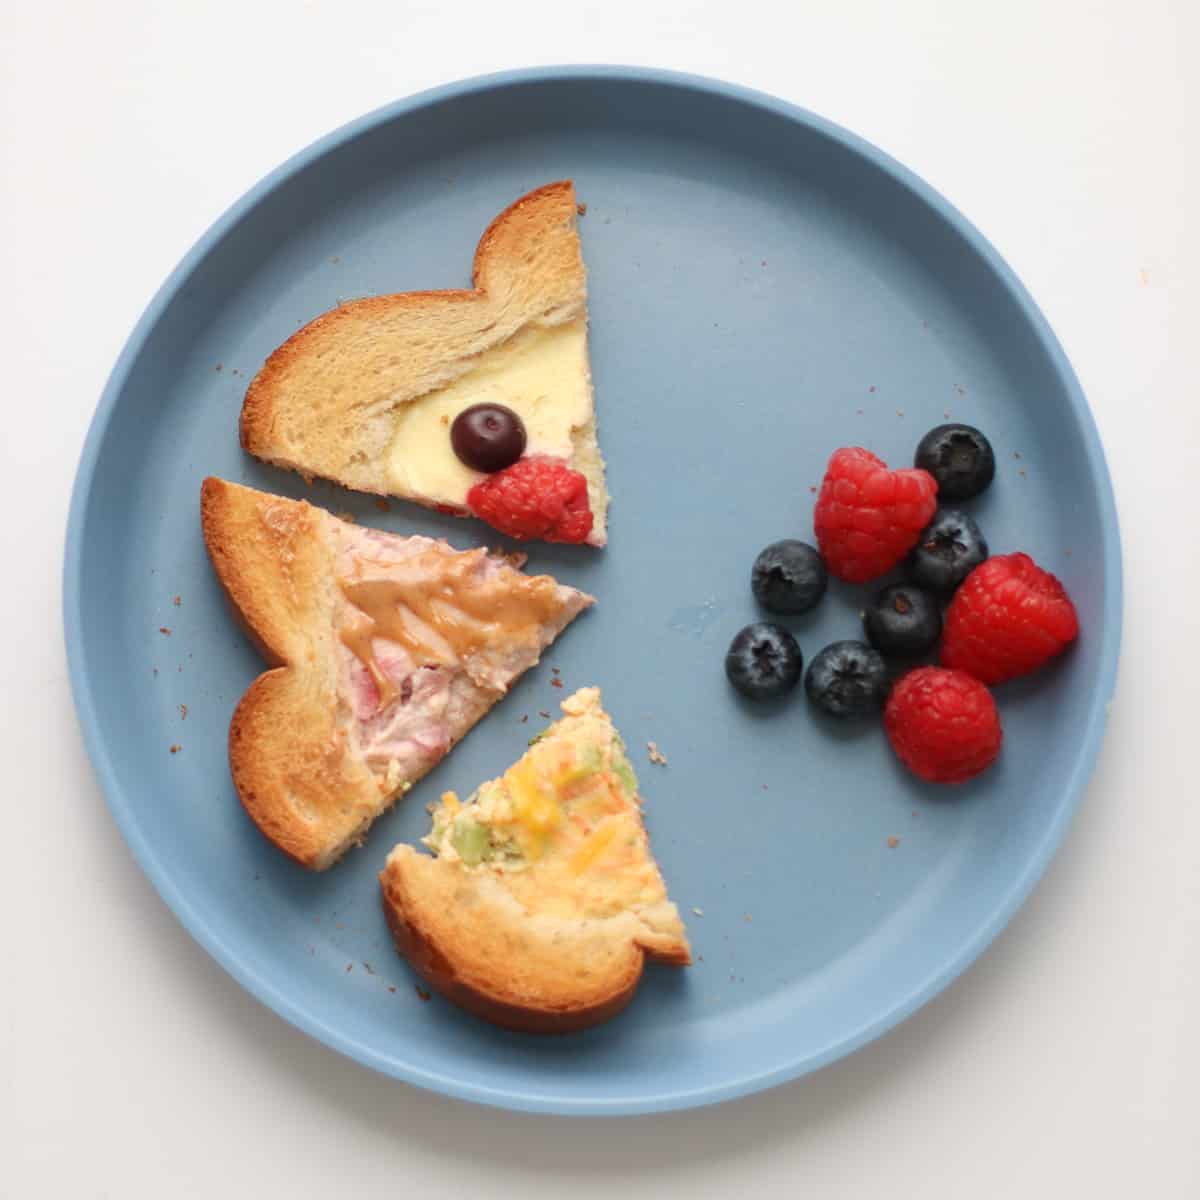 A toddler's plate with toast cut into three triangles with berries on the side.